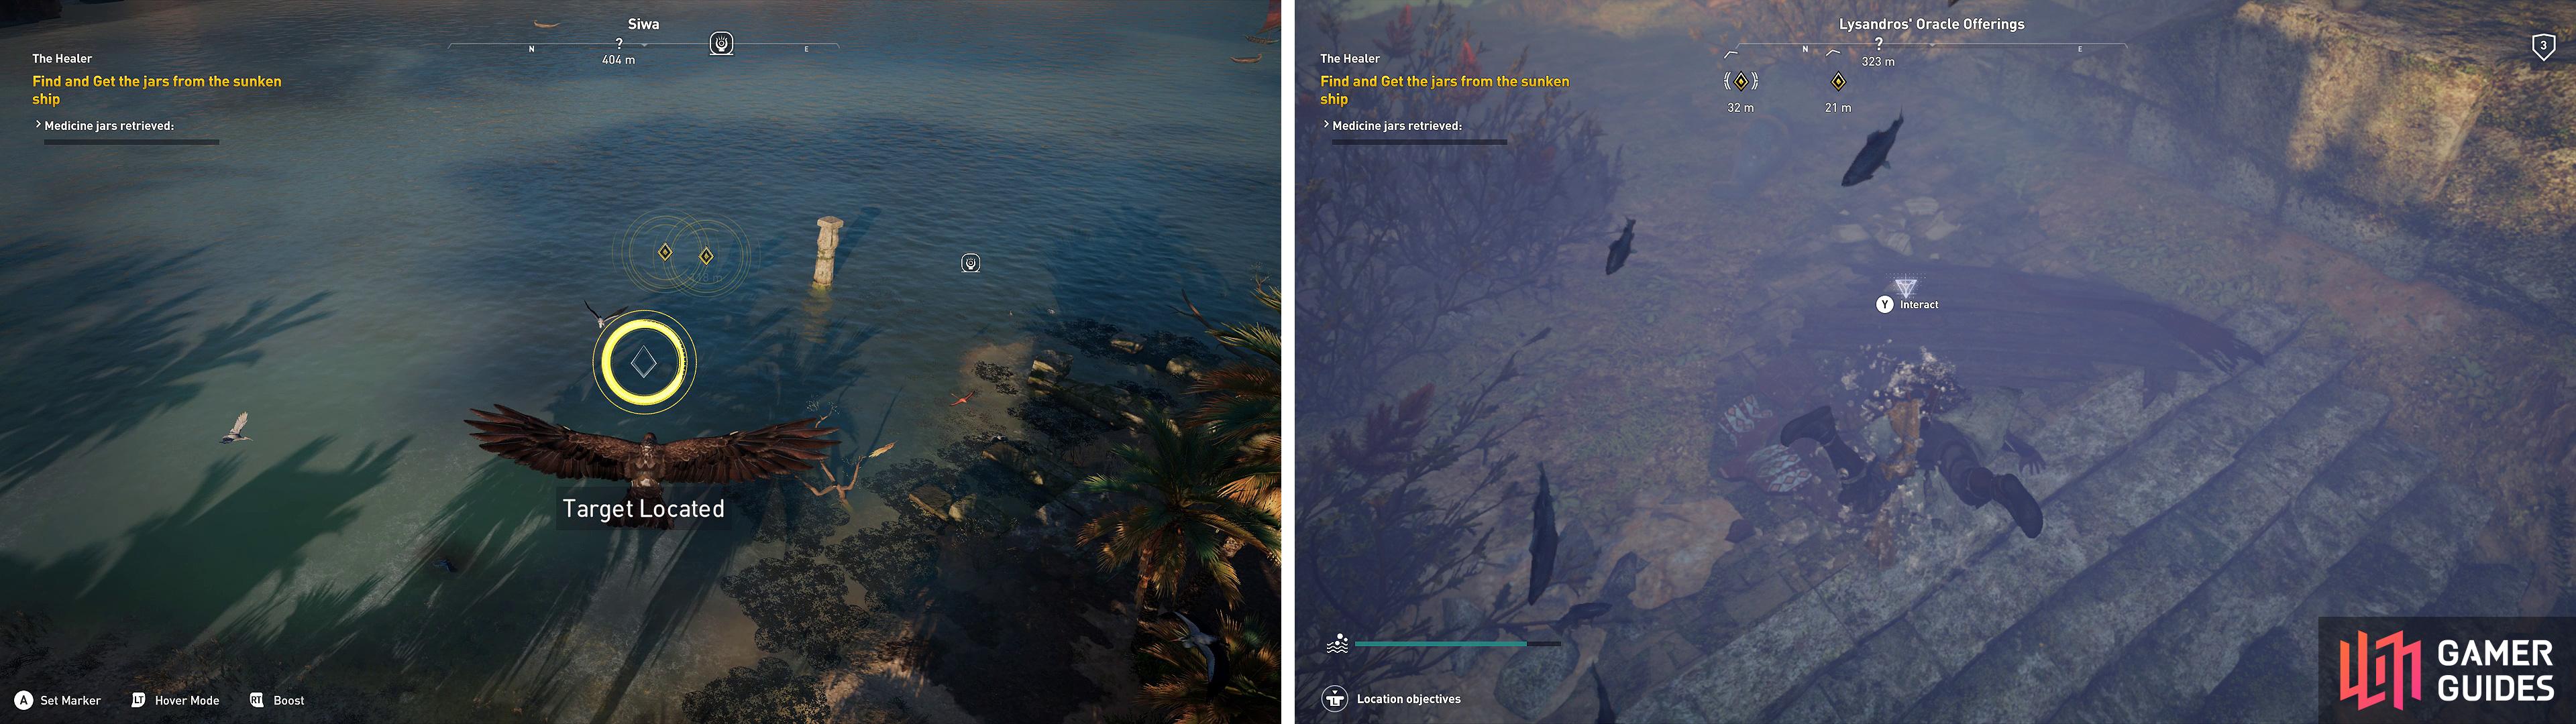 Use Senu to spot the medicine from the air (left) and then dive down to retrieve it (right). Be mindful of your breath meter too!